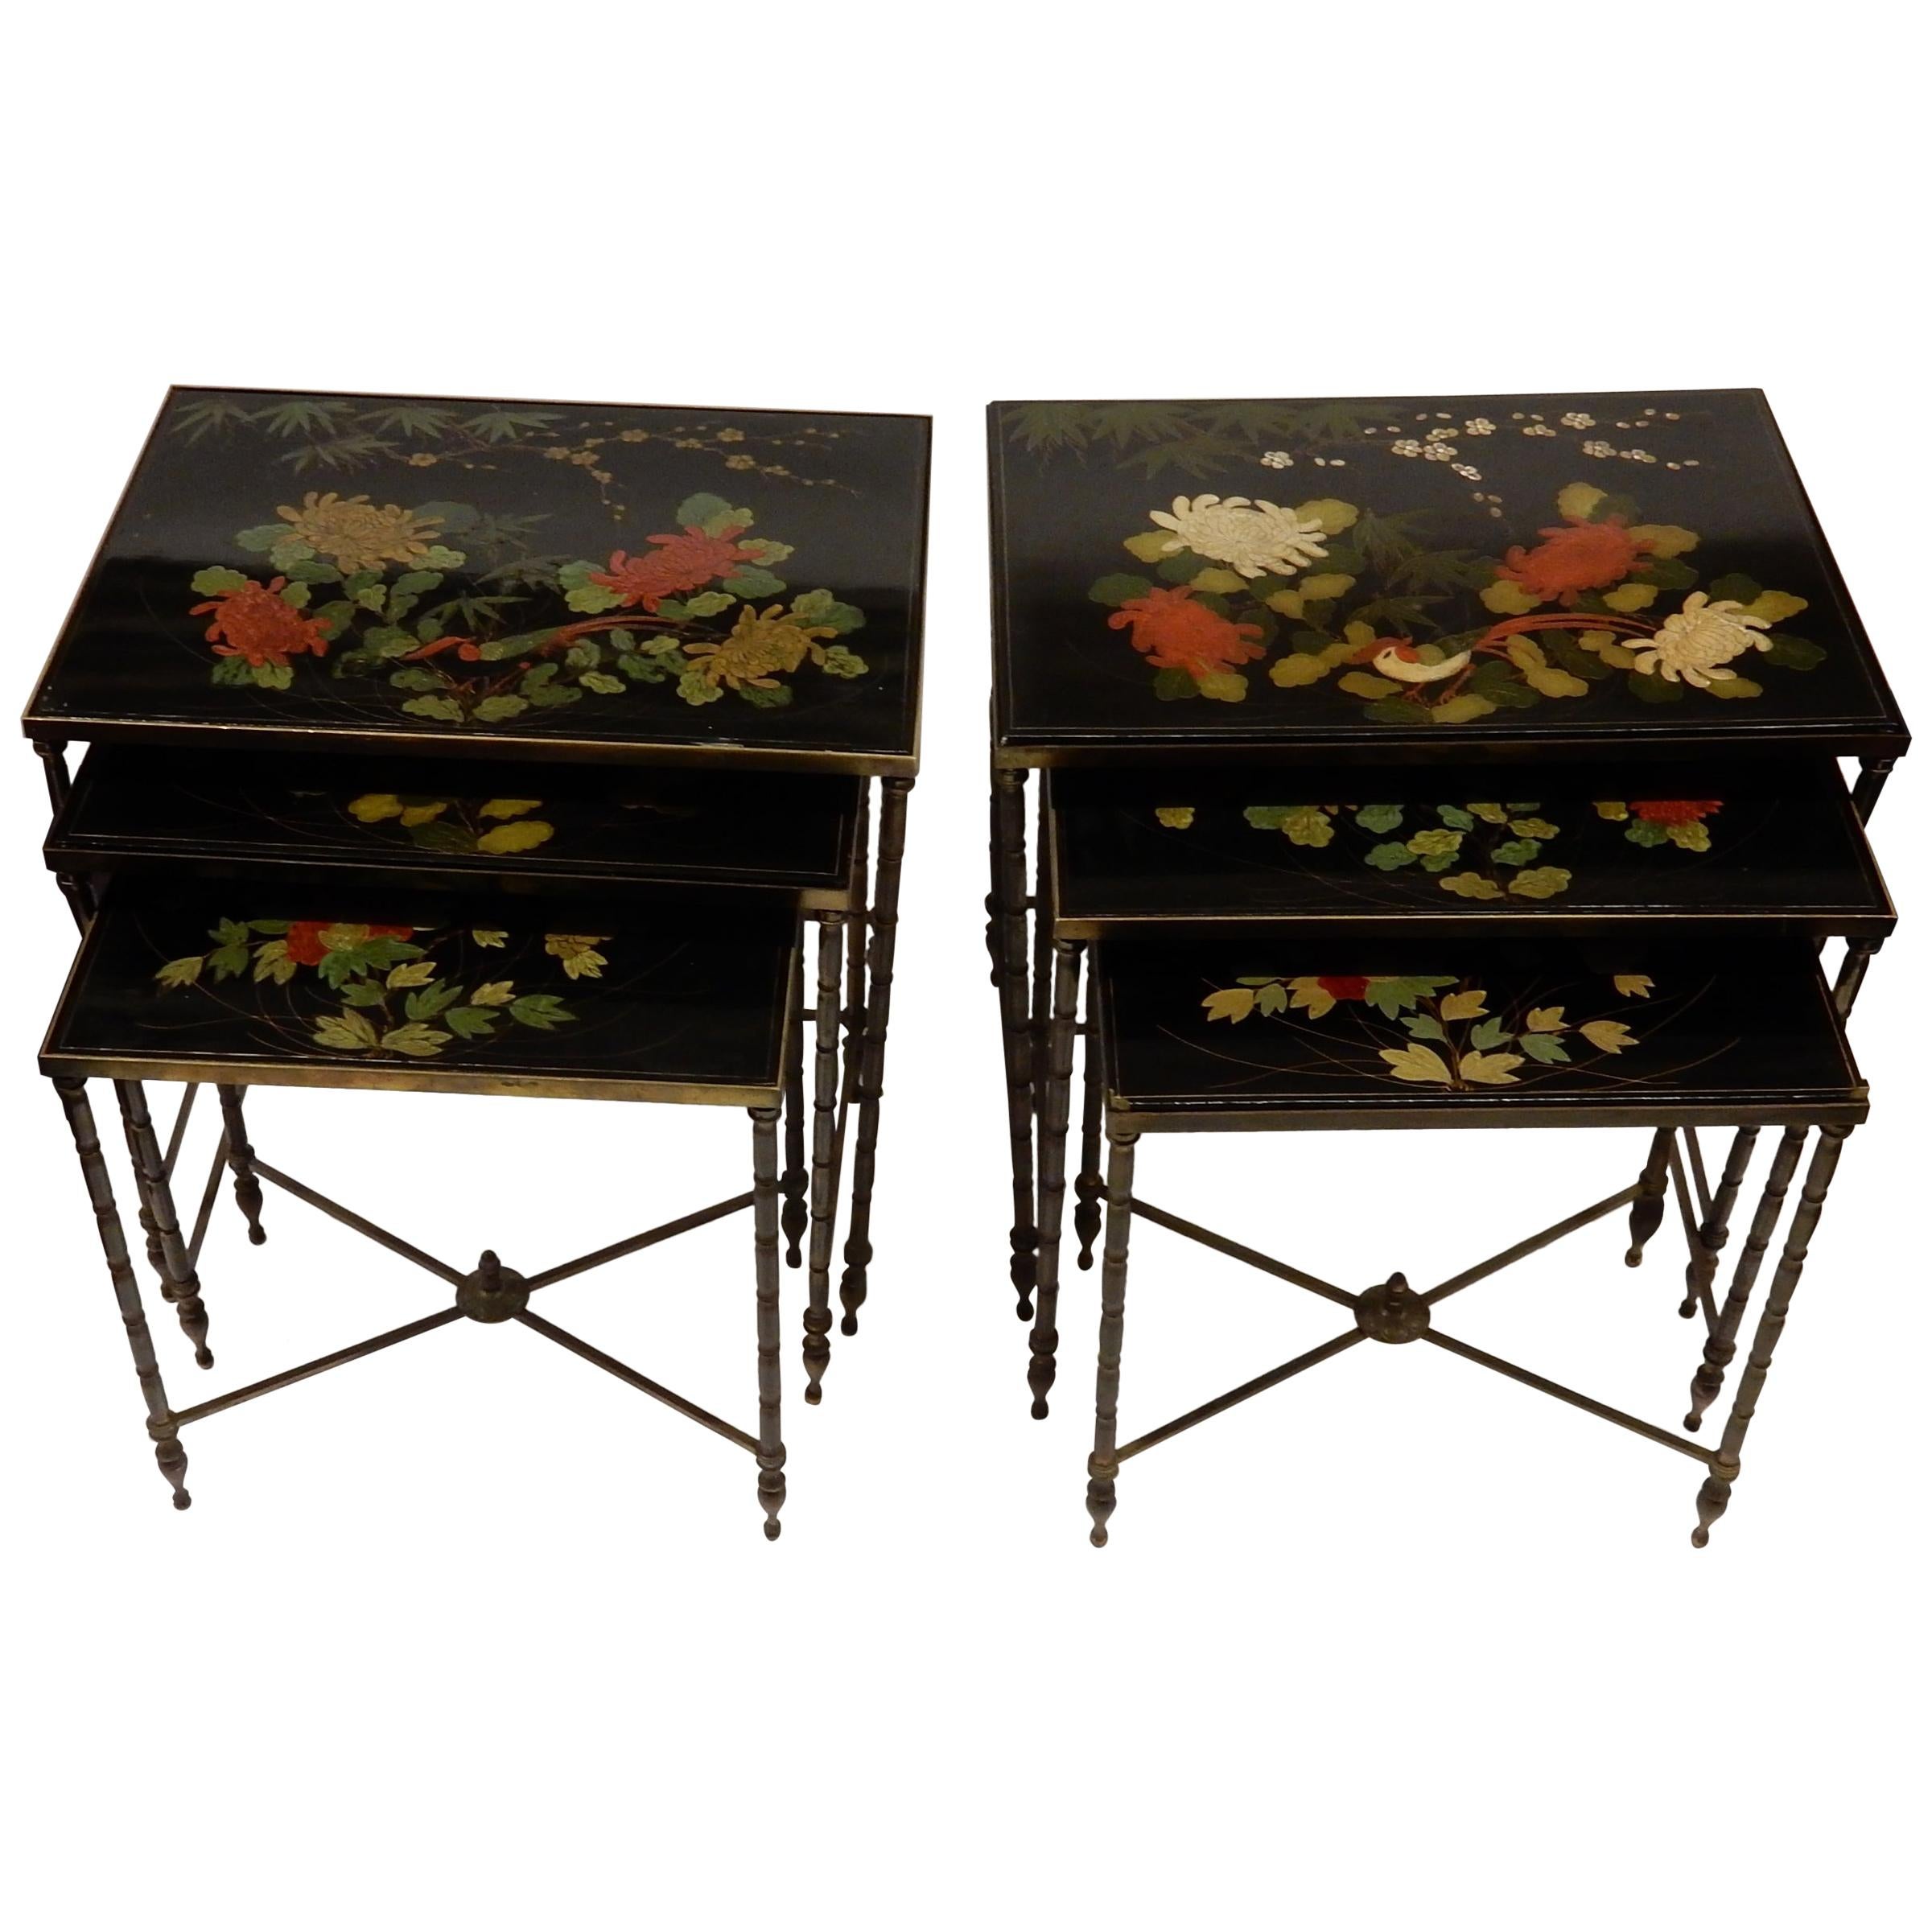 1950-1970 Pair of Series of 3 Nesting Tables For Sale